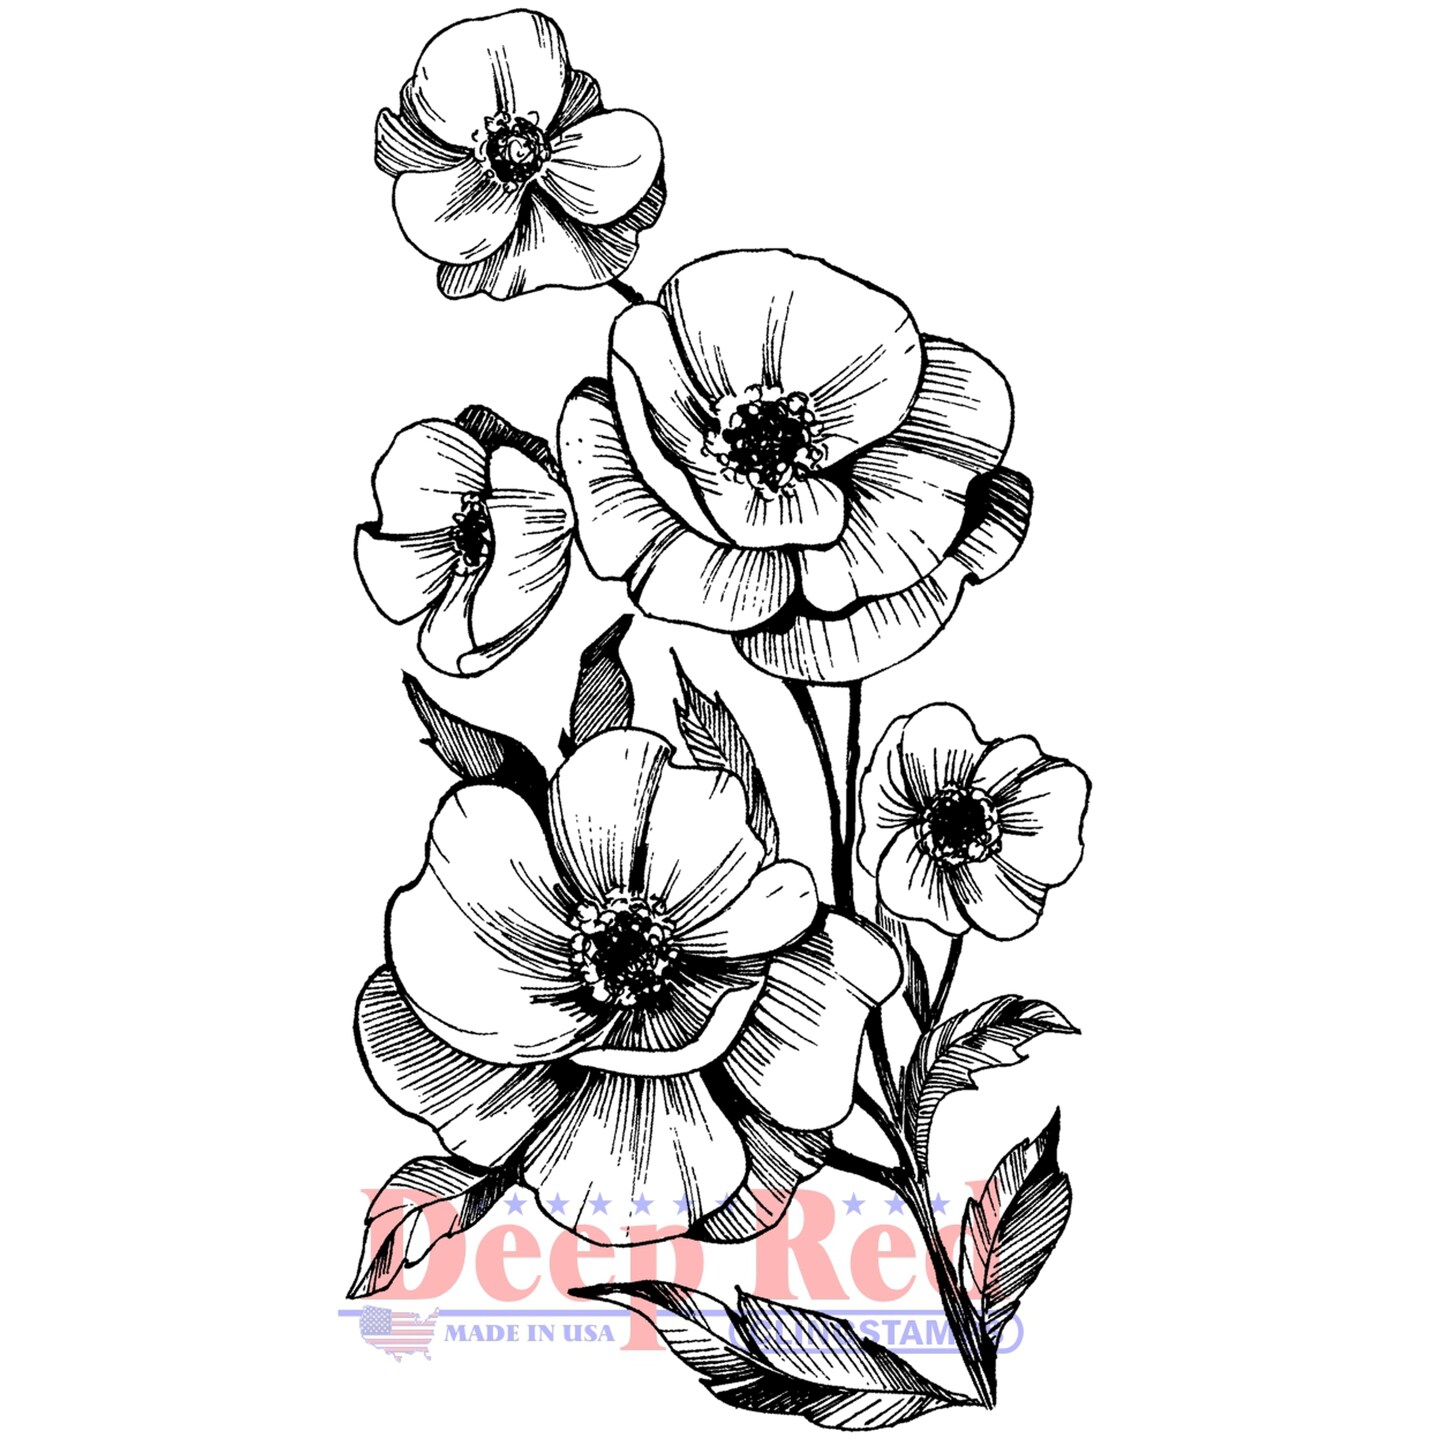 Deep Red Stamps Poppies Rubber Cling Stamp 2.2 x 4.2 inches